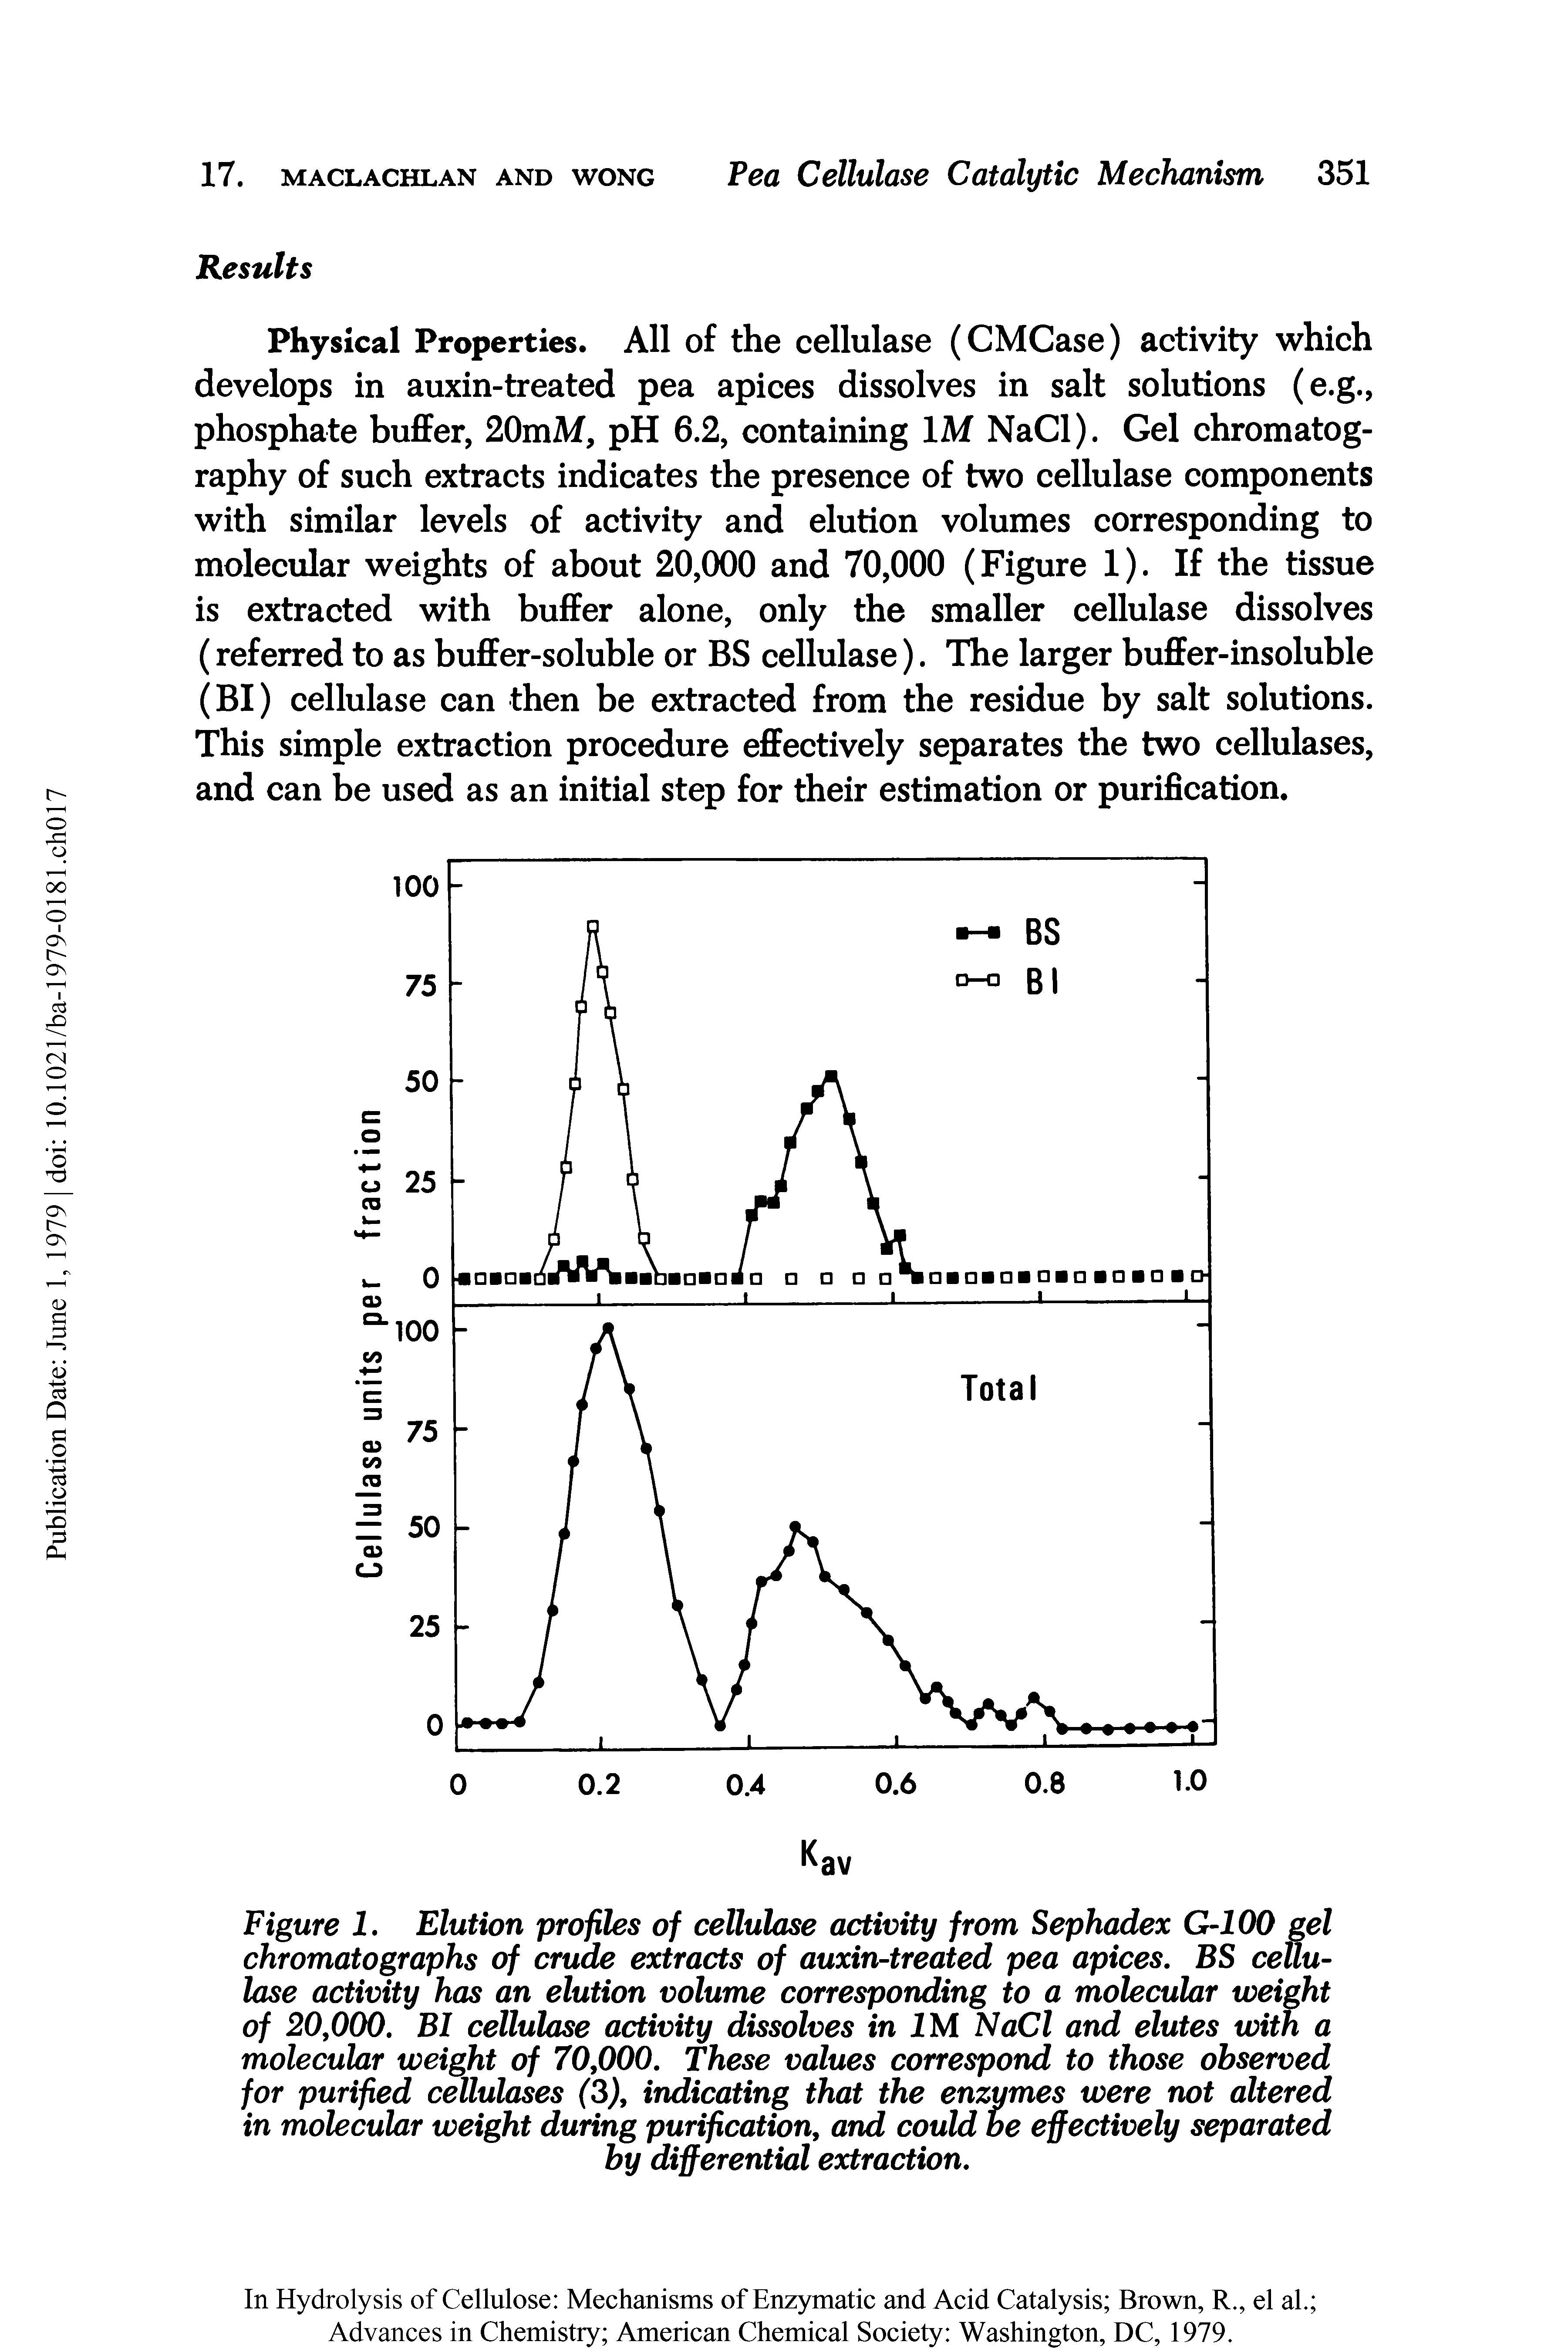 Figure 1. Elution profiles of cellulase activity from Sephadex G-100 gel chromatographs of crude extracts of auxin-treated pea apices. BS cellulose activity has an elution volume corresponding to a molecular weight of 20,000. BI cellulase activity dissolves in 1M NaCl and elutes with a molecular weight of 70,000. These values correspond to those observed for purified cellulases (3), indicating that the enzymes were not altered in molecular weight during purification, and could be effectively separated by differential extraction.